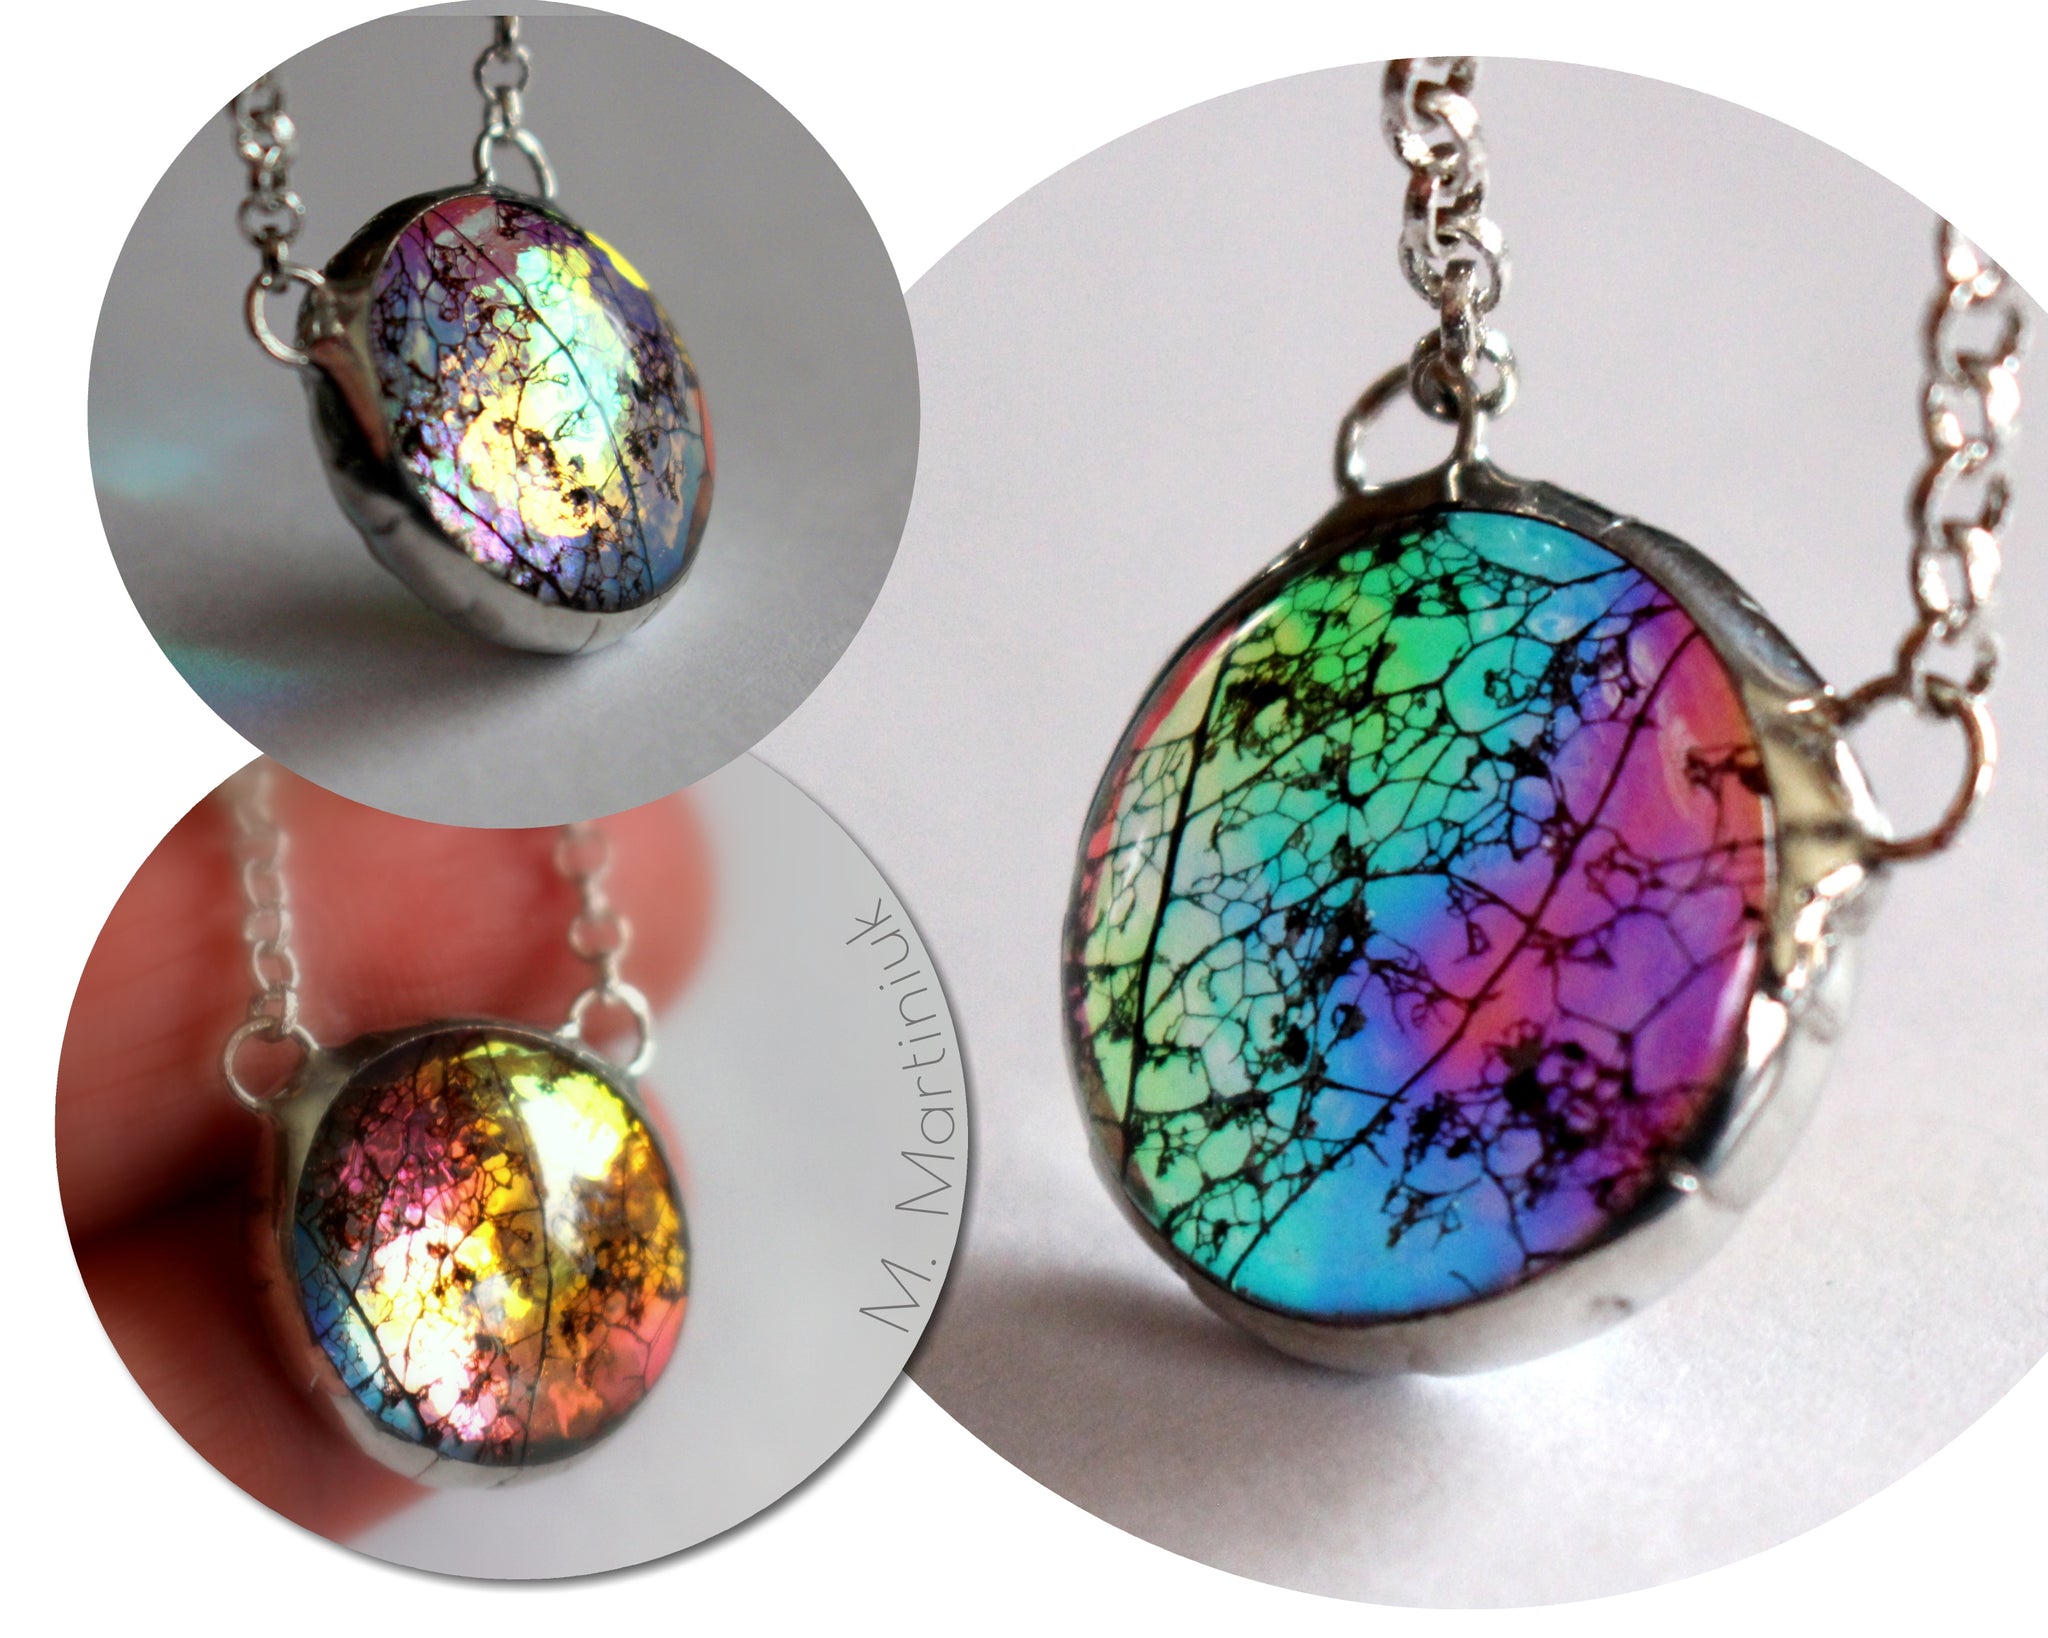 Color Shifting Rainbow Glass Pendant Leaf in Silver